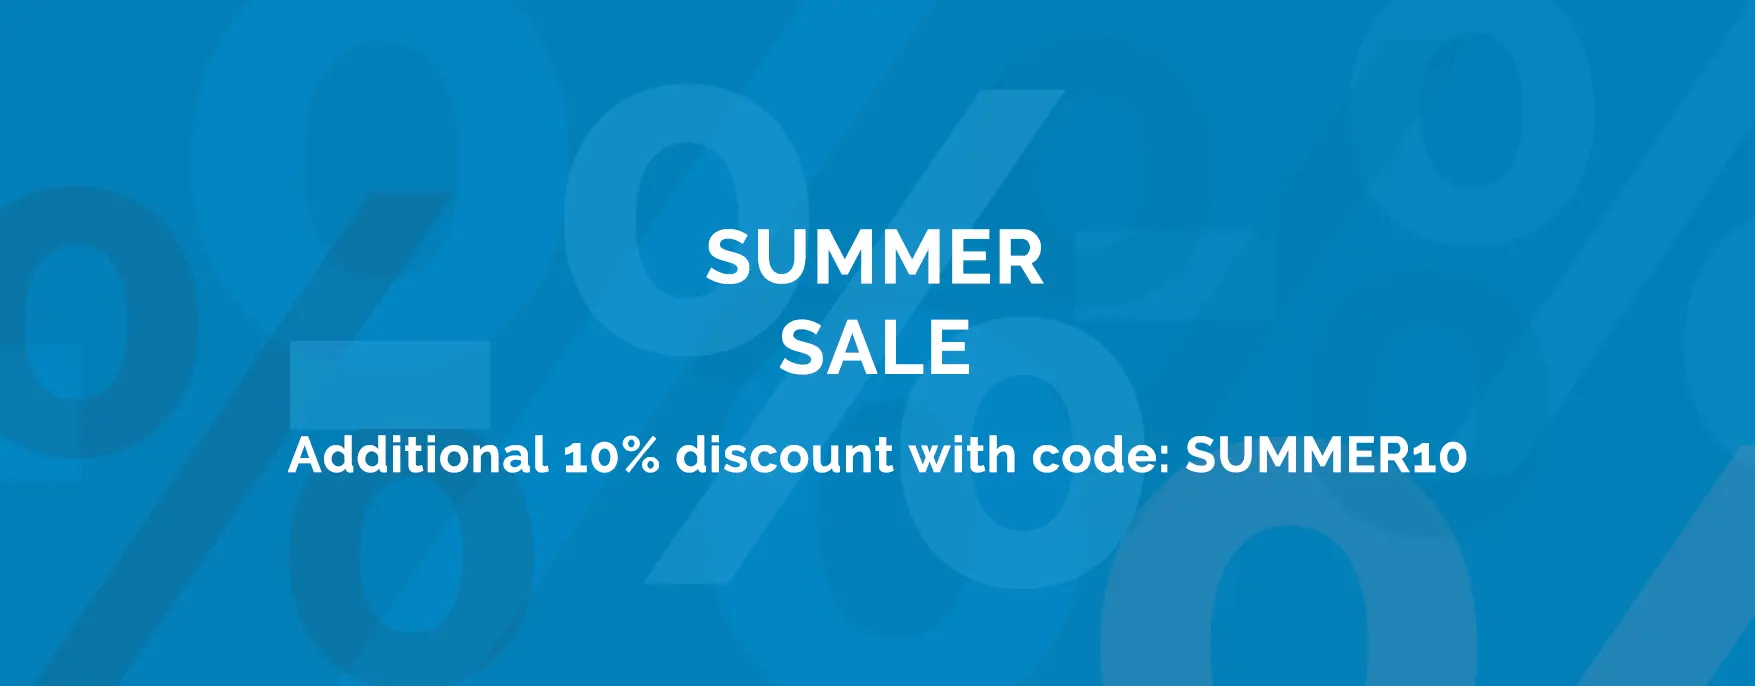 Buy scented candles on the summer sale at candleworld.eu!